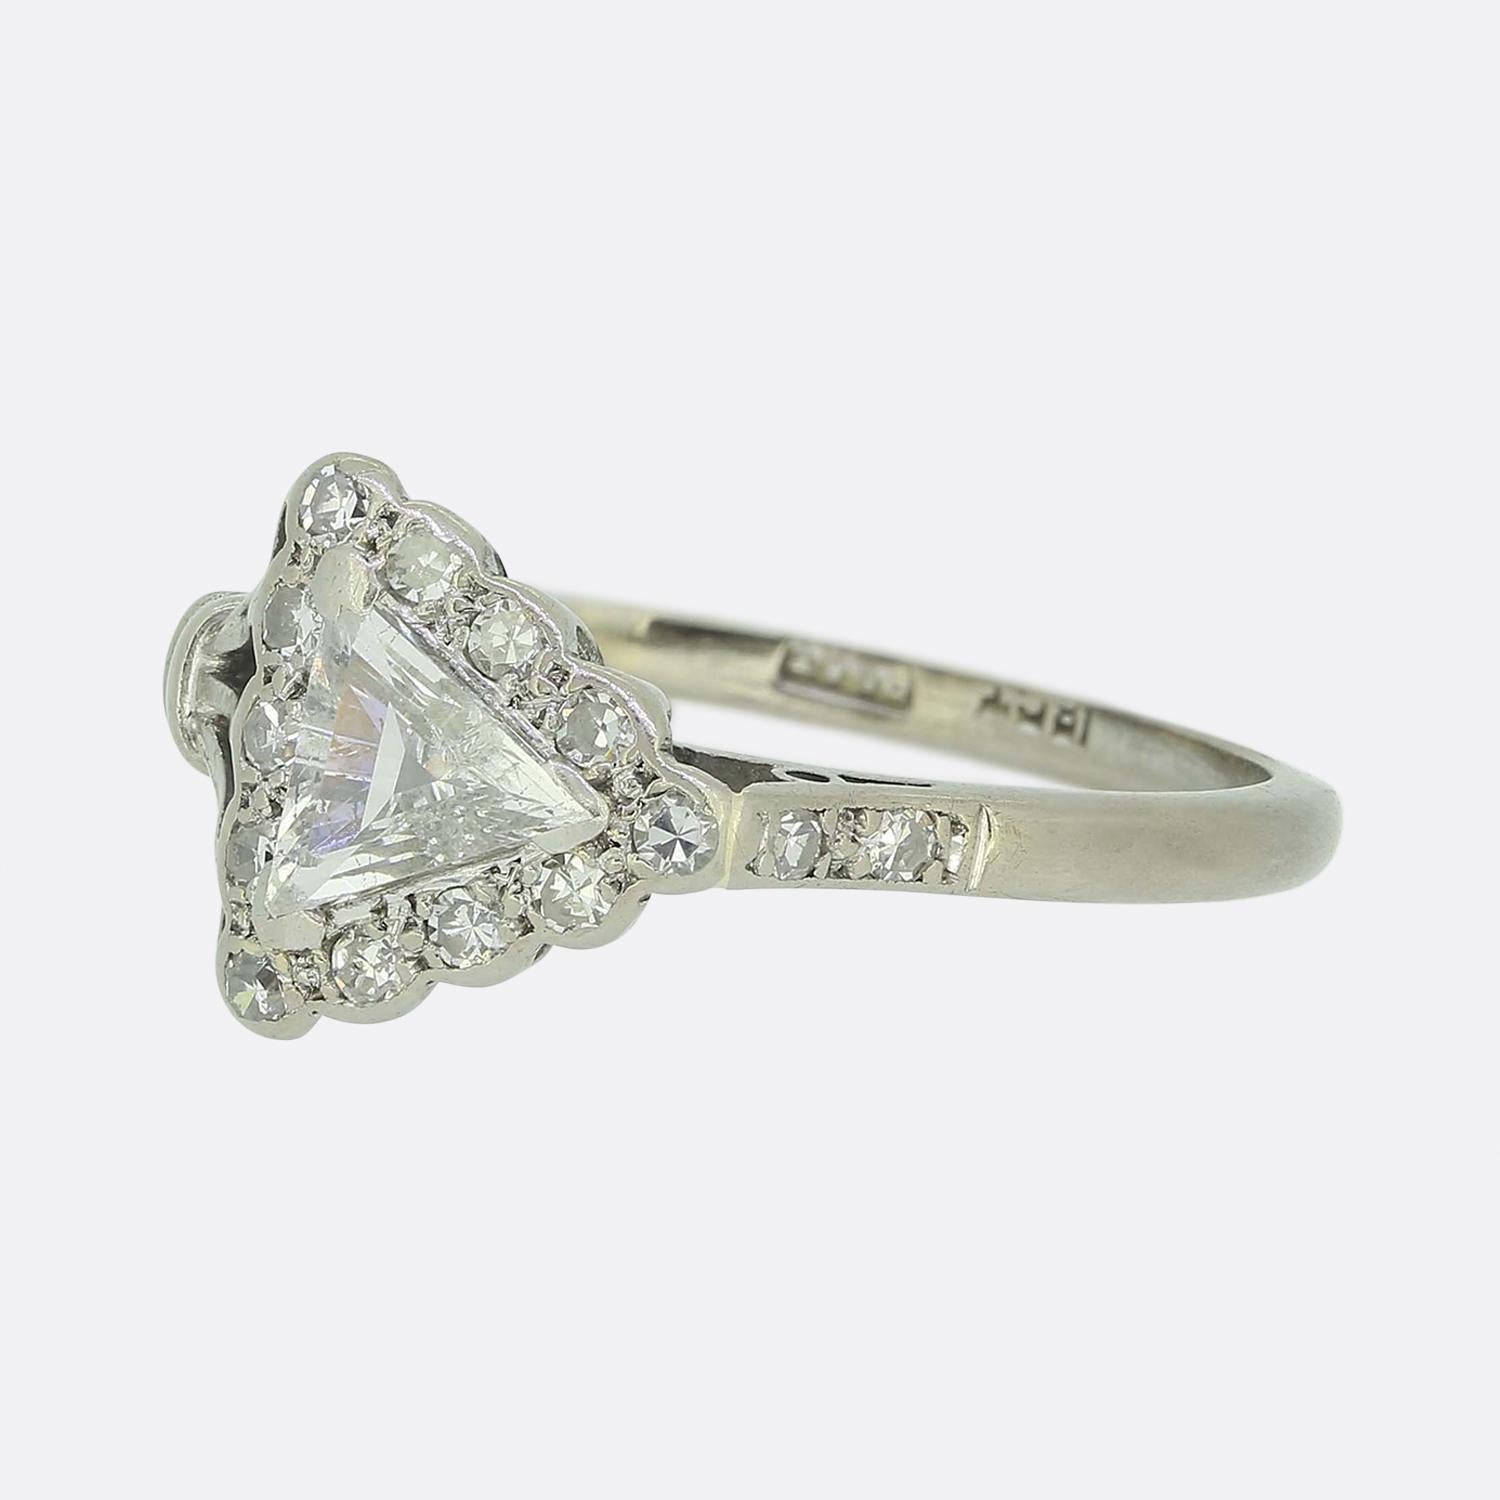 Here we have a gorgeous diamond ring taken from the Art Deco era. This piece has been crafted from both 18ct gold and platinum and features an excellently hand cut triangular shaped diamond at the centre of face. This bright white stone sits